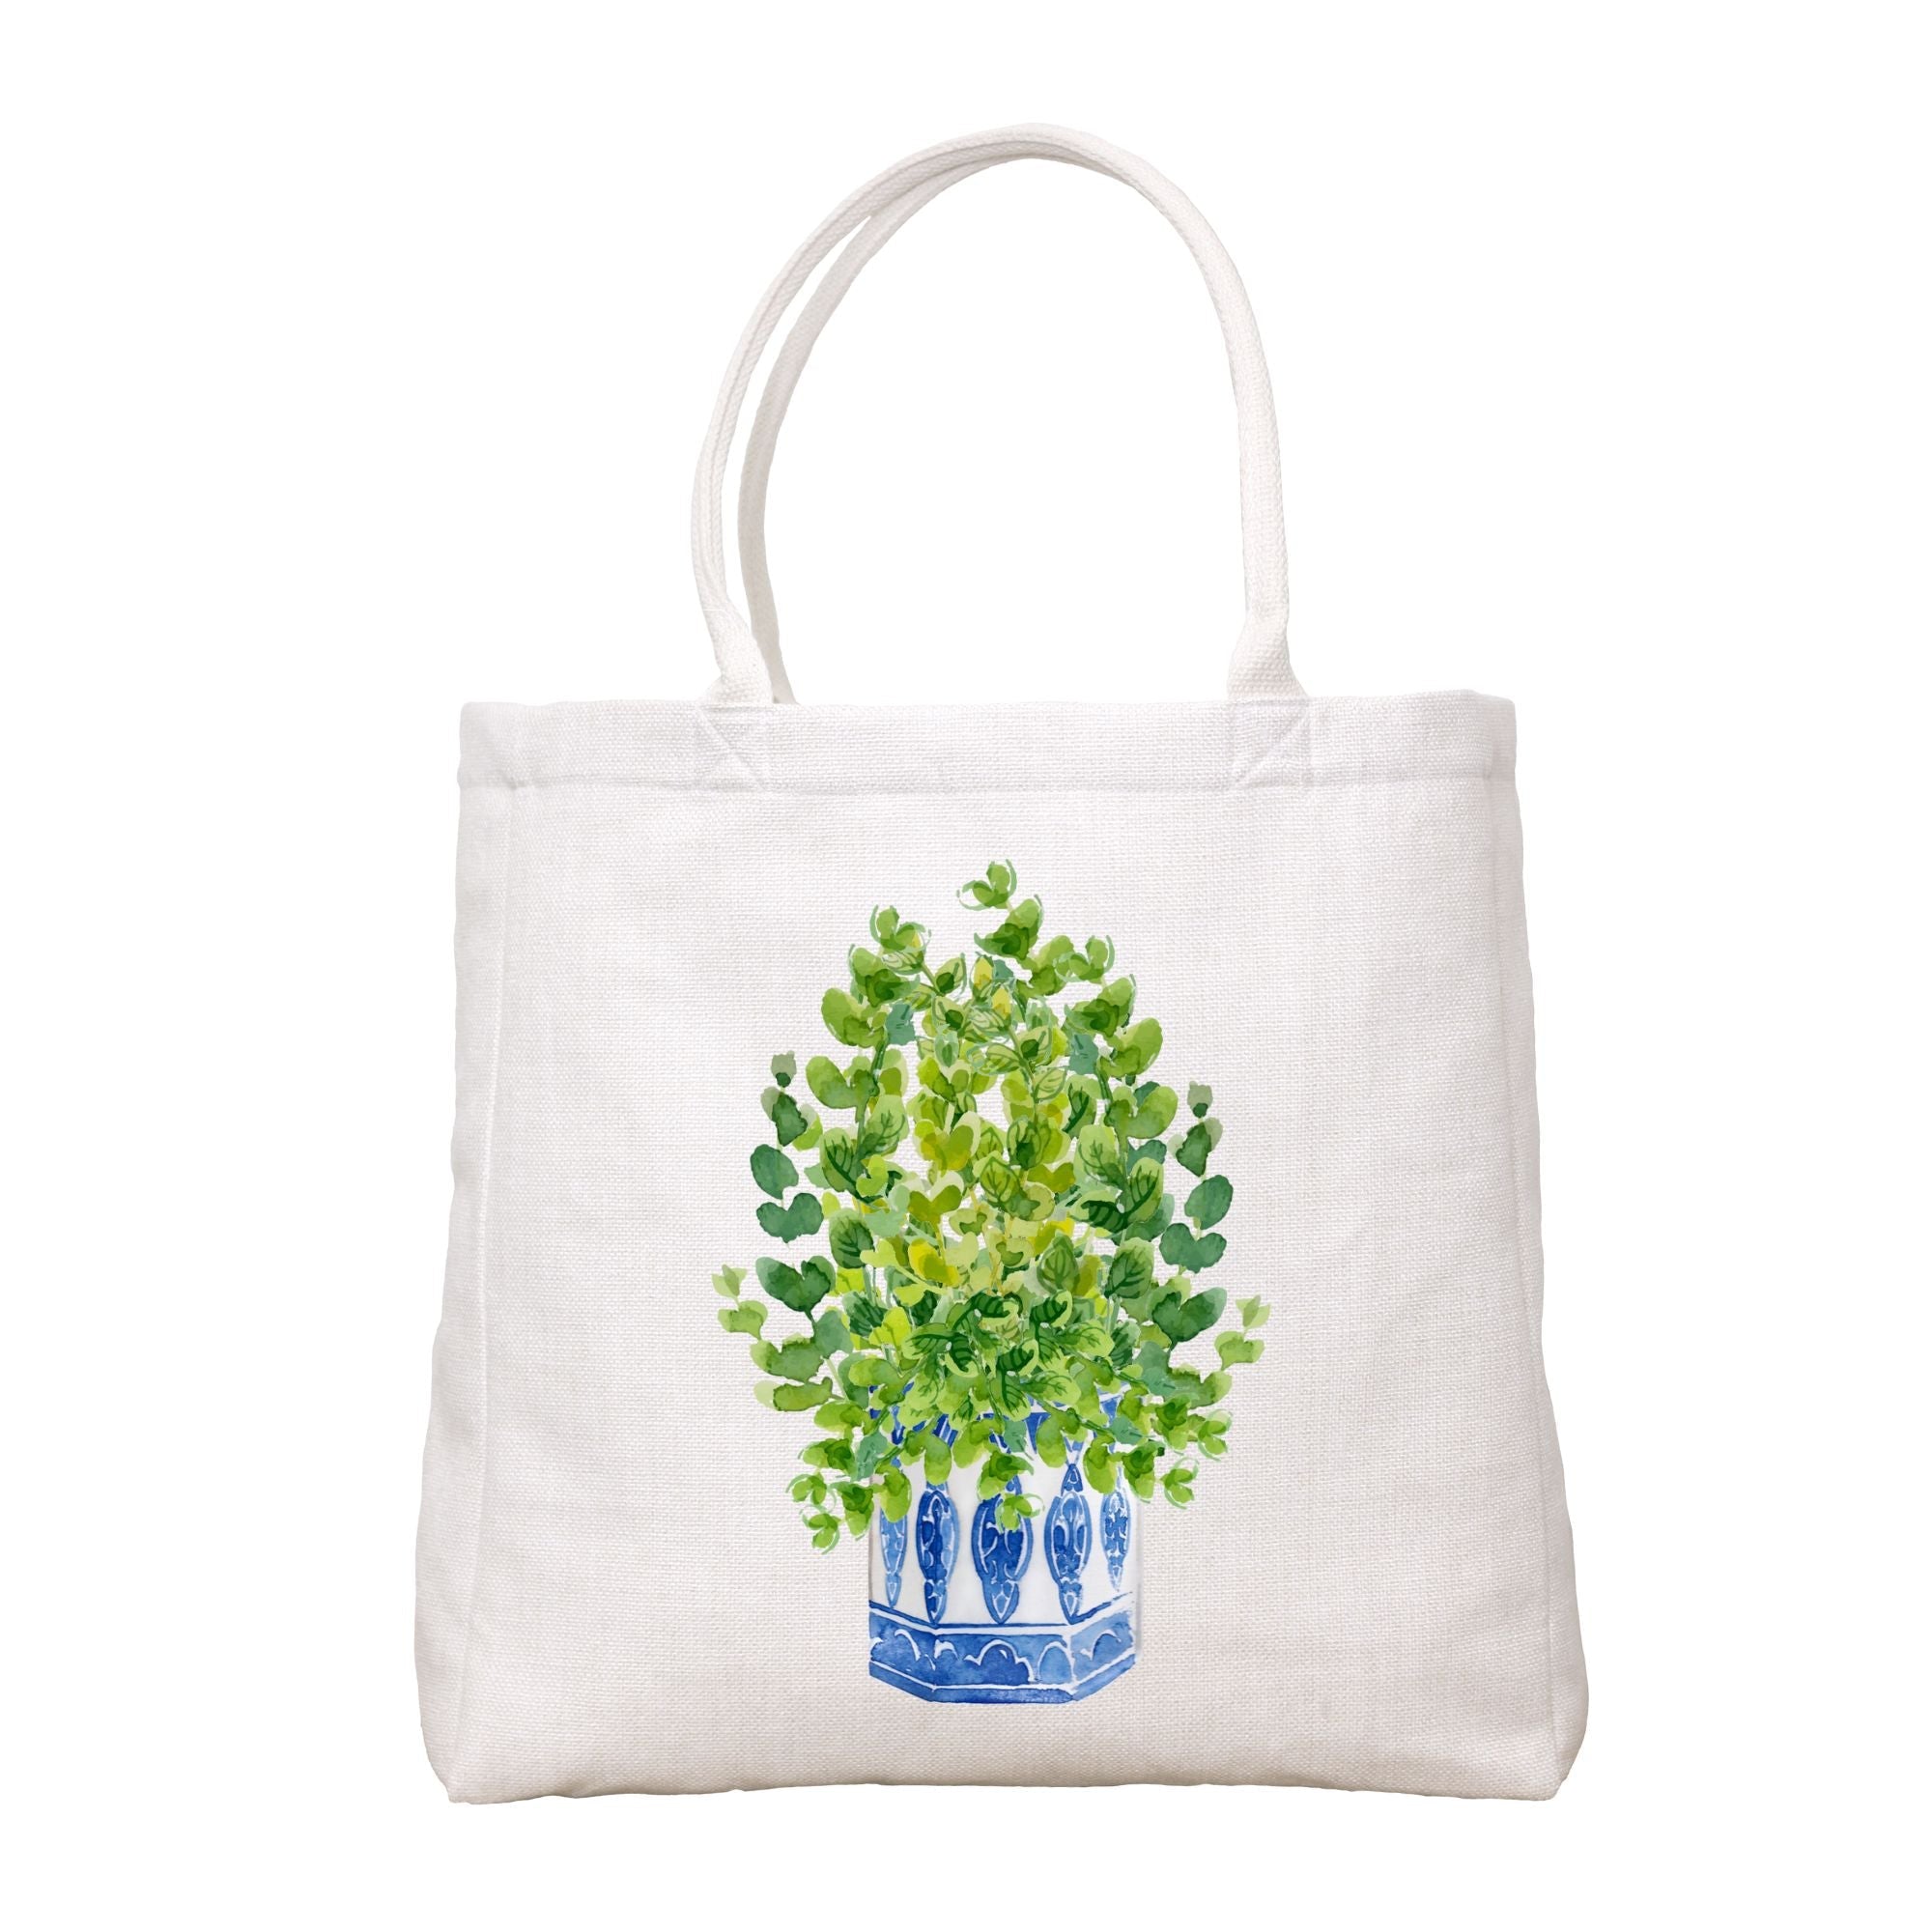 Blue And White Vase 2 Tote Bag